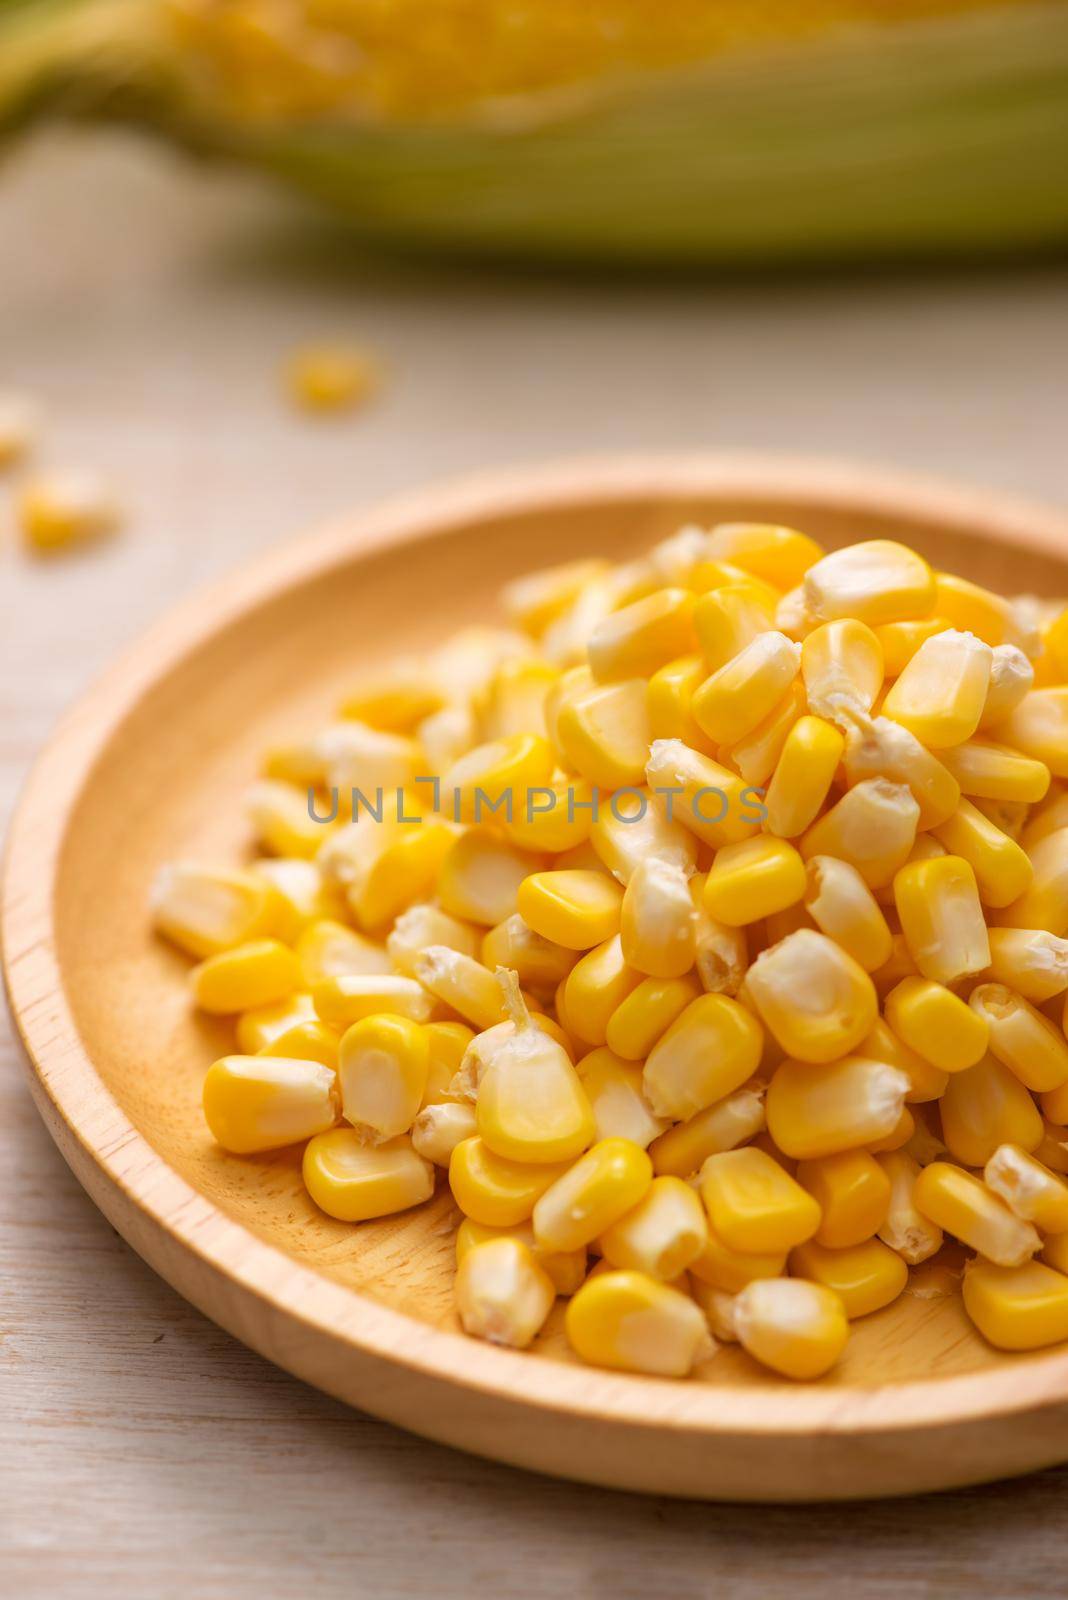 Sweet corn seeds on a wooden plate  by makidotvn